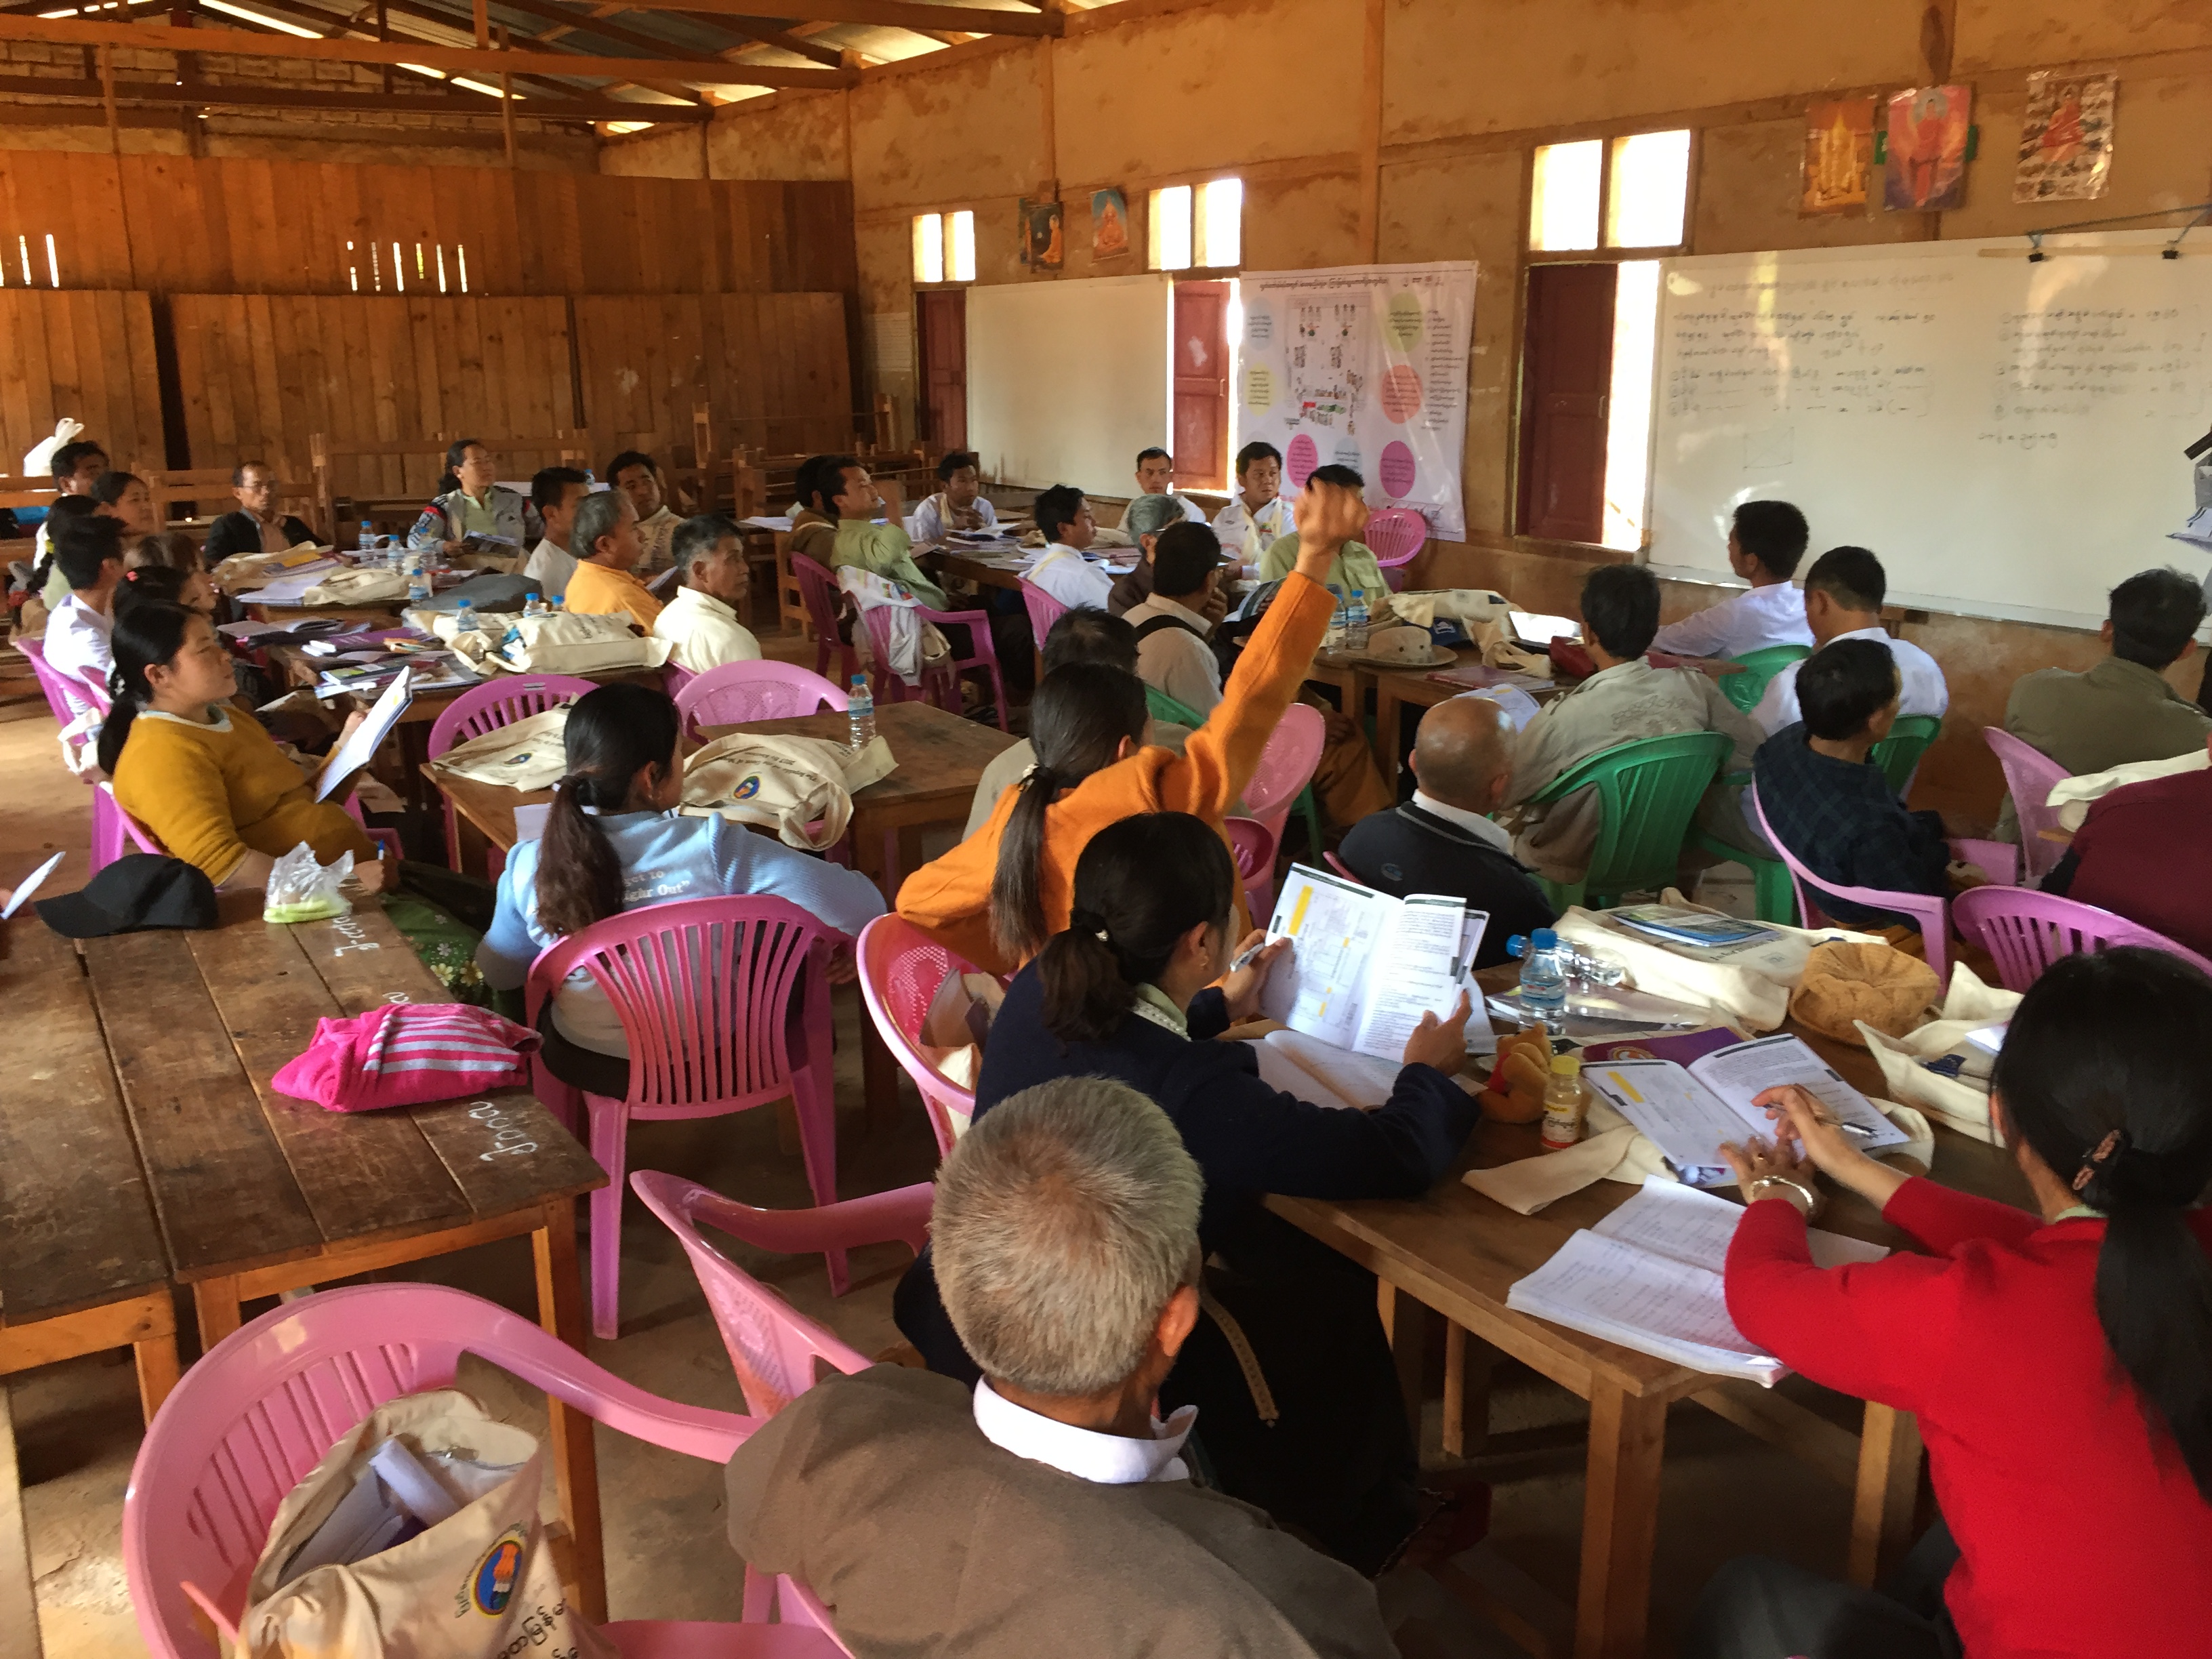 Election officials from the wards and village-tracts of Kyethi towship, Shan State, where elections could not be held in 2015 due to continued armed insurgency. Photo credit: Greg Kehailia